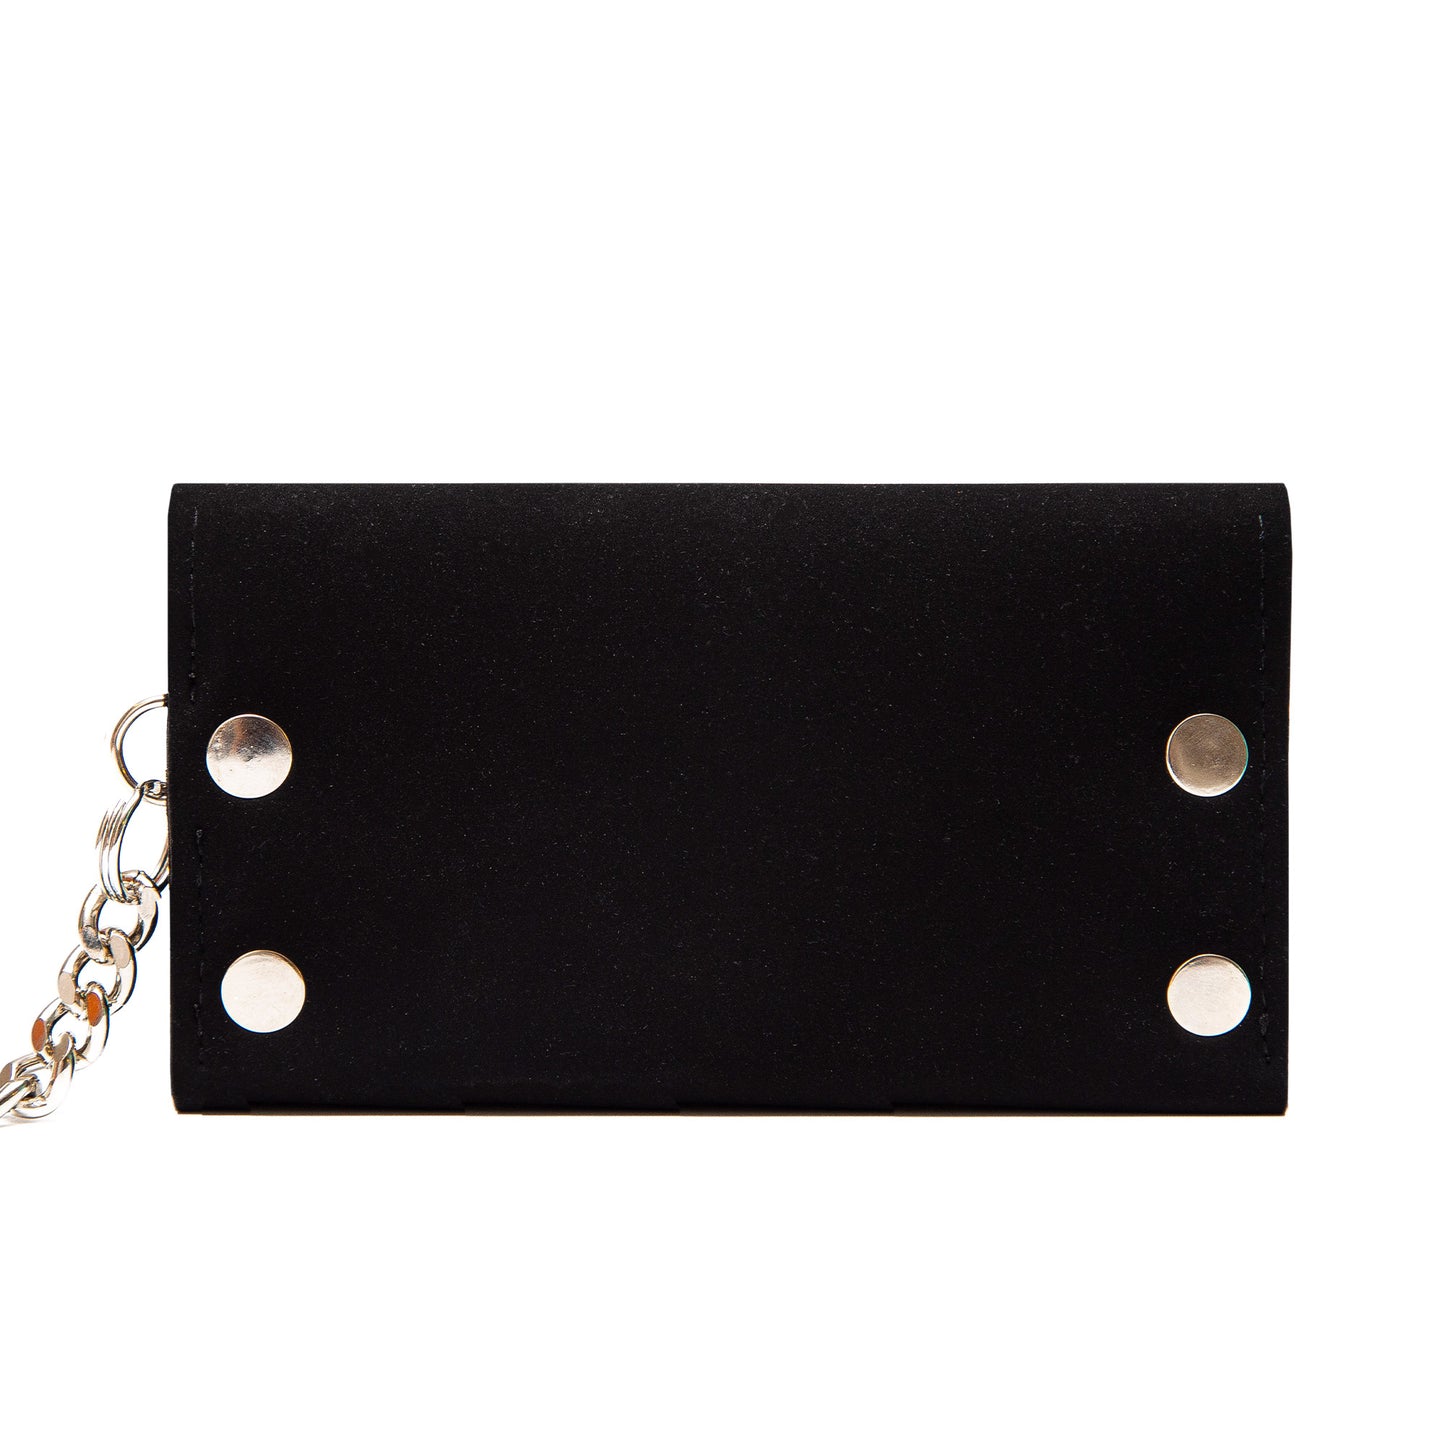 Handcrafted Biker Wallet with Detachable Chain - Cruelty-Free and Fashionably Functional - Black Faux Leather